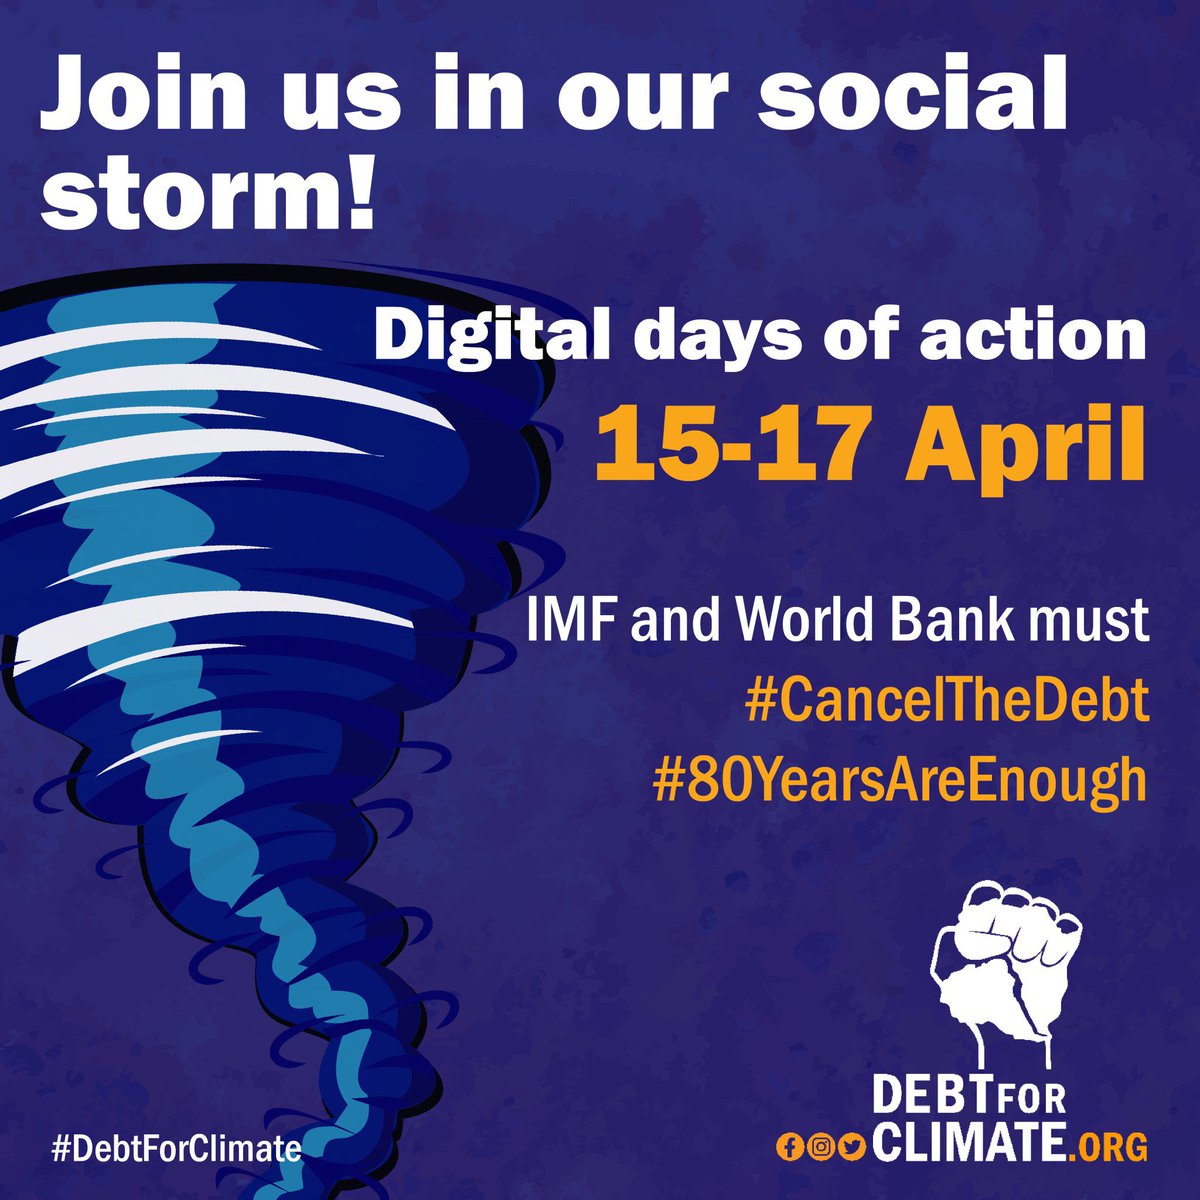 #Zambia is in the middle of a huge debt crisis. 80 years of IMF’s crippling loans continues to push debts up higher leaving little to spend to protect Zambian citizens from the climate crisis and economic hardship! @IMFNews & @WorldBank need to #CancelTheDebt #80YearsAreEnough